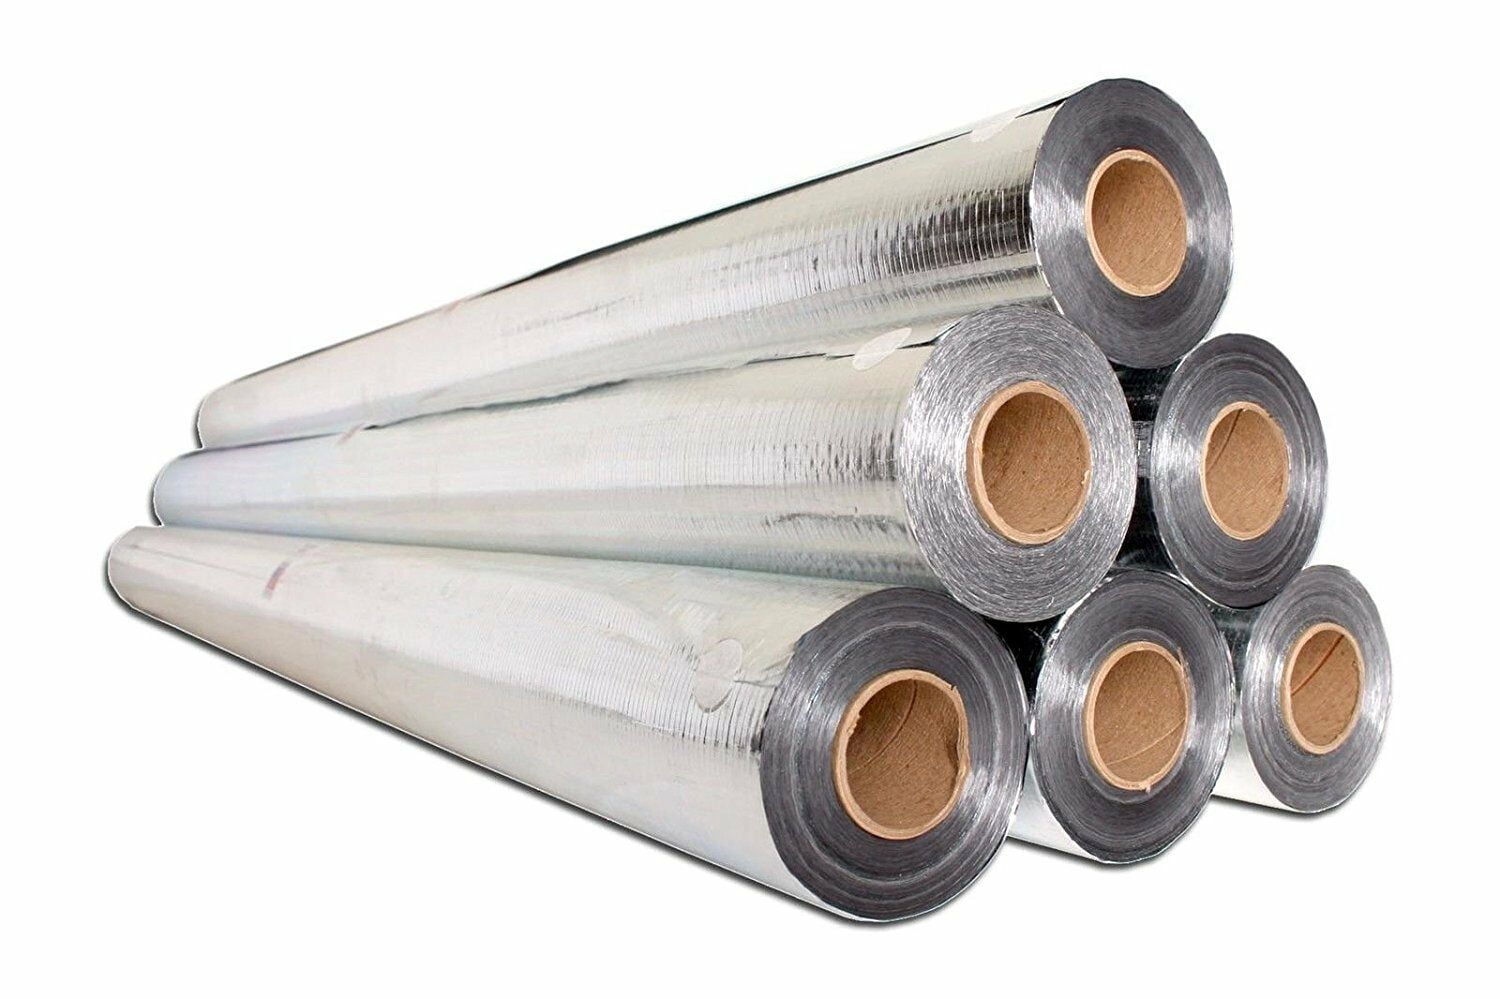 No Tear Ducts & More! Garages Commercial Grade Radiant Barrier Wrap for Weatherproofing Attics Windows 24 inch X 25 Ft Roll RVs Double Bubble Reflective Foil Insulation Industrial Strength